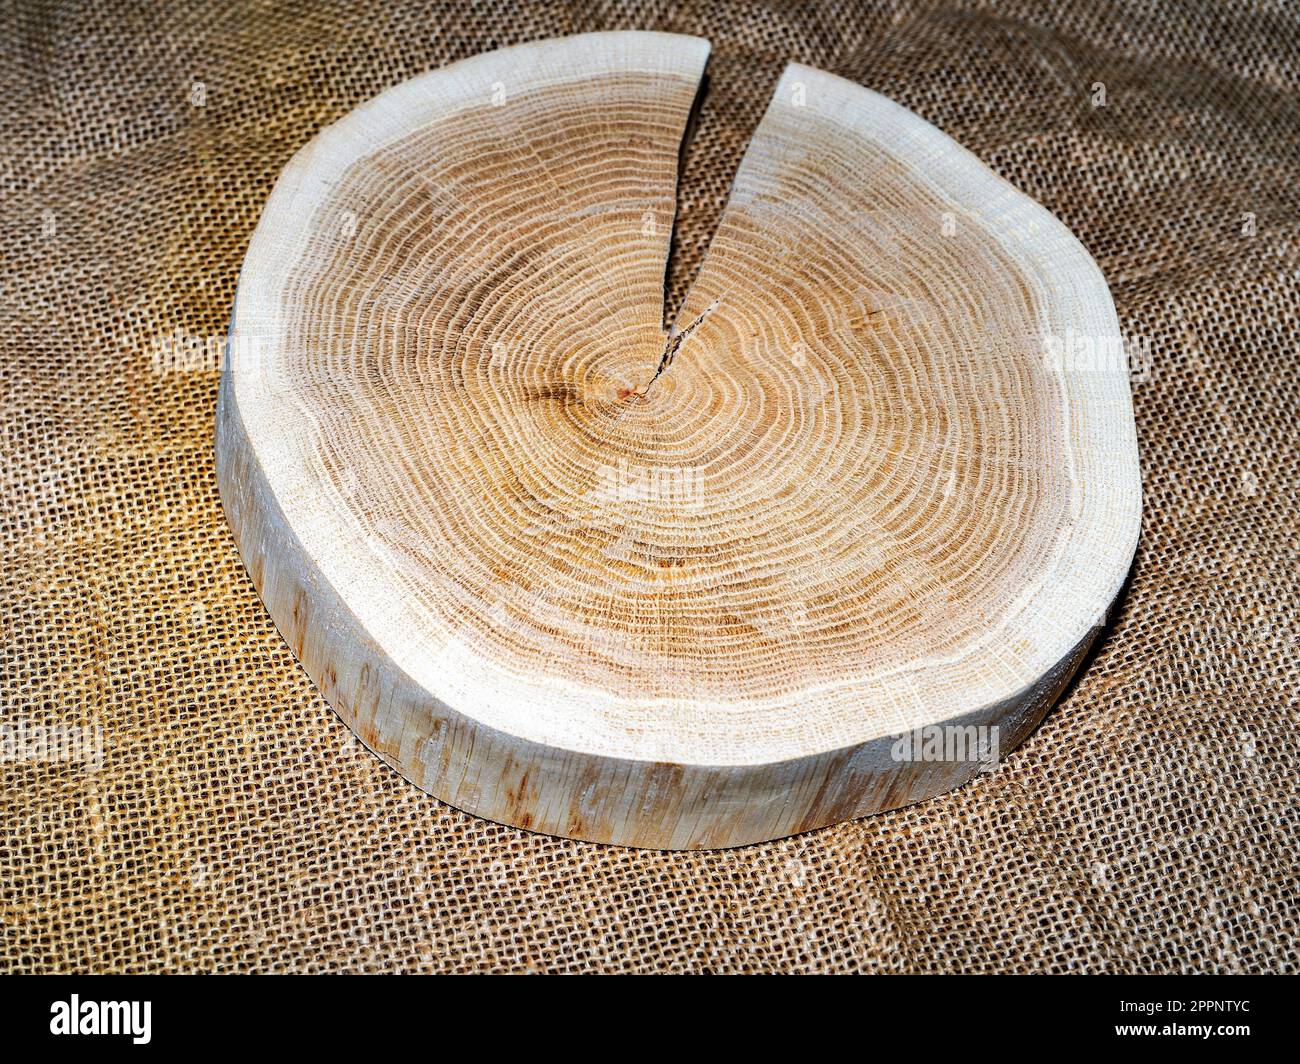 Wooden stump, cross section, cut wood tree trunk slice. Wooden serving tray on burlap background. Stock Photo